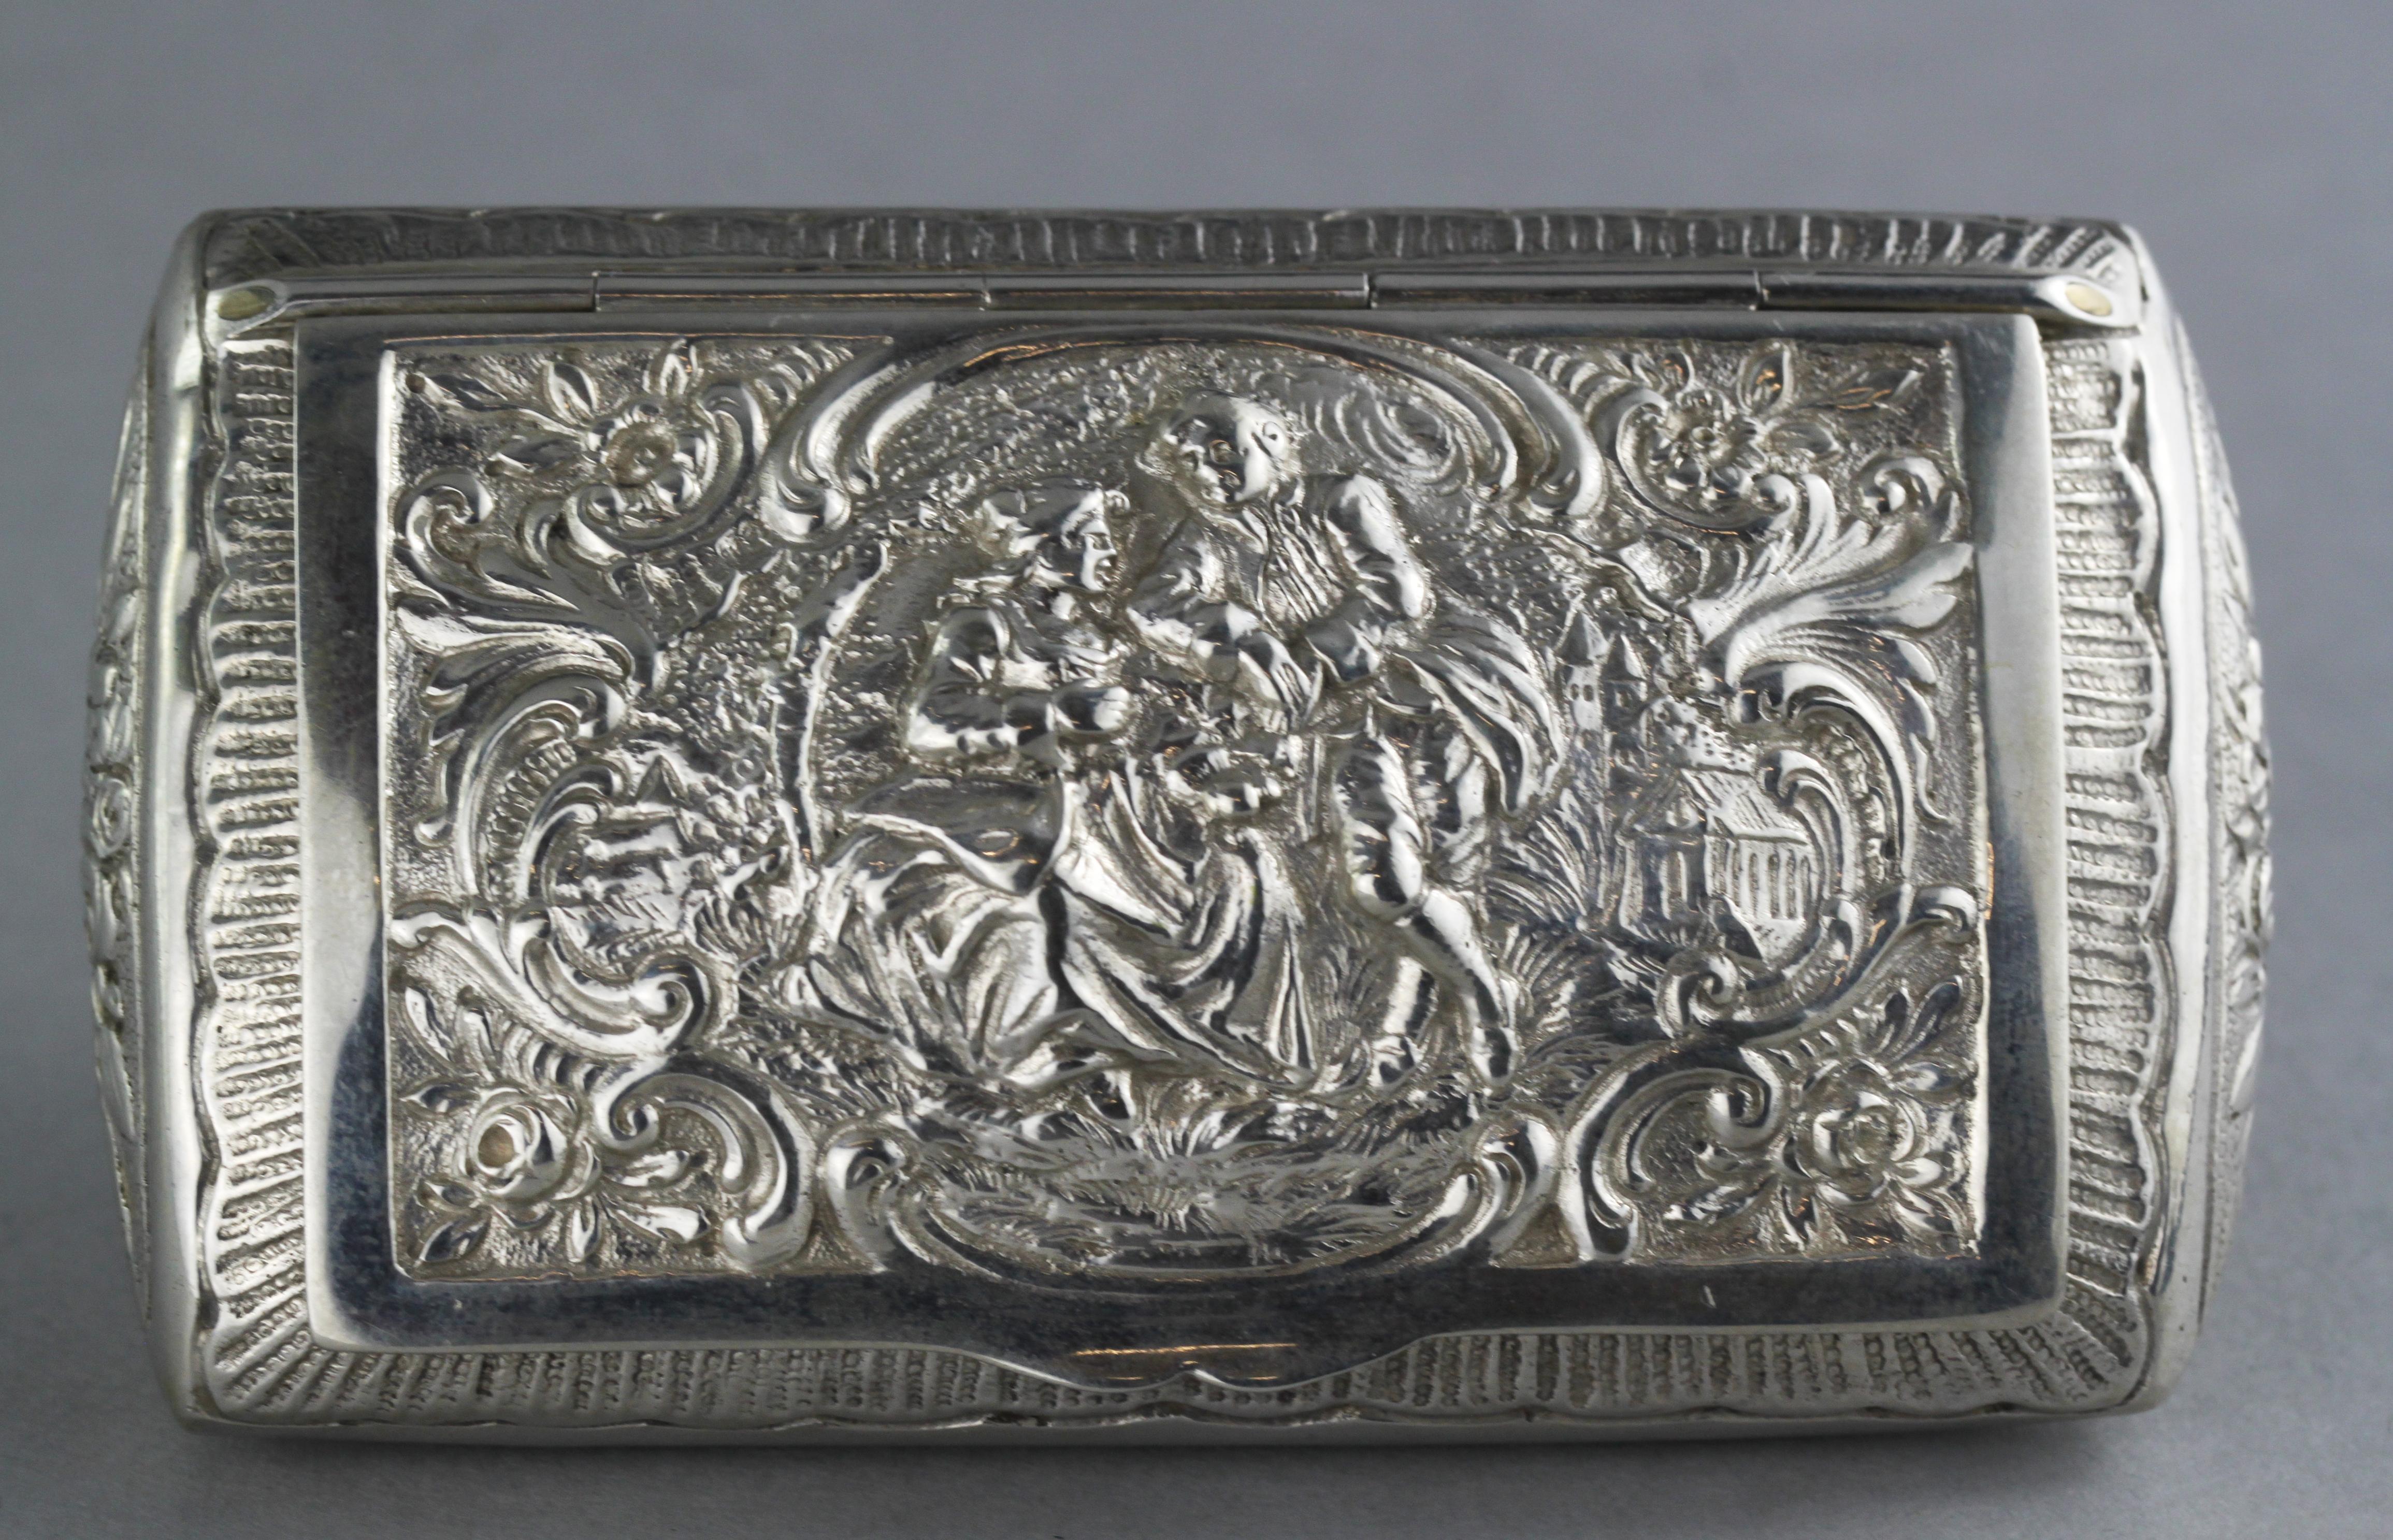 Antique silver Belgian early 20th century snuff box. It has been beautifully engraved with flowers and scrolls. Richly decorated box in a unique shape.The inside has been gilded.

Made in Belgium early 20th century.

Hallmarked 835